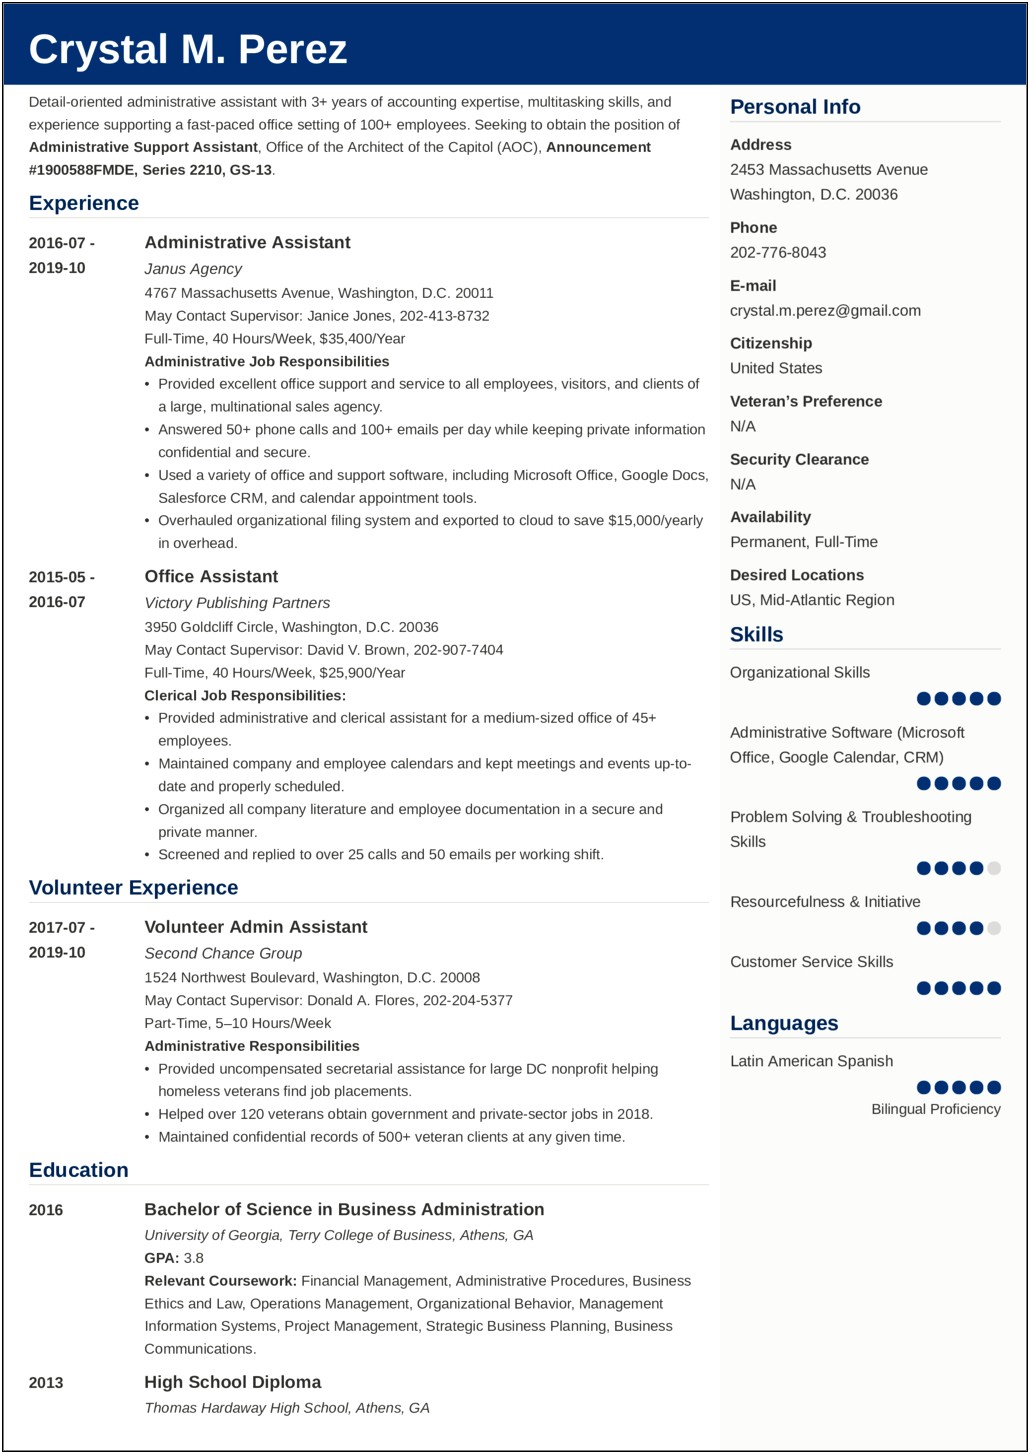 Sample Federal Government Resume Entry Level